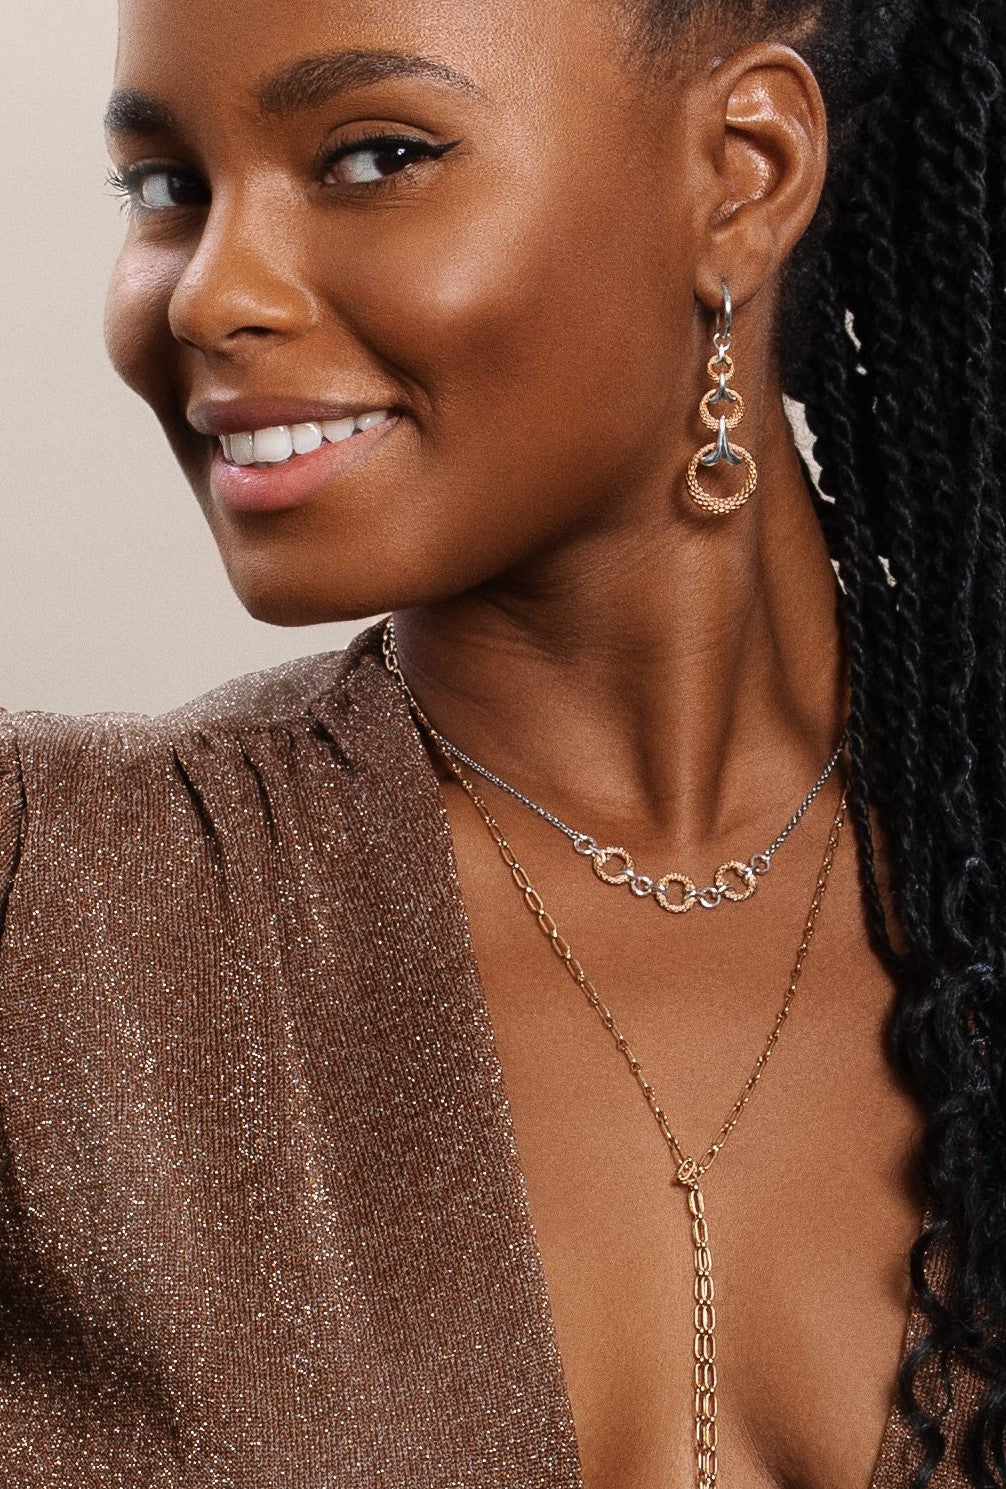 Franshesca Javier wears earrings and necklace in new two tone rose gold and silver from REALM